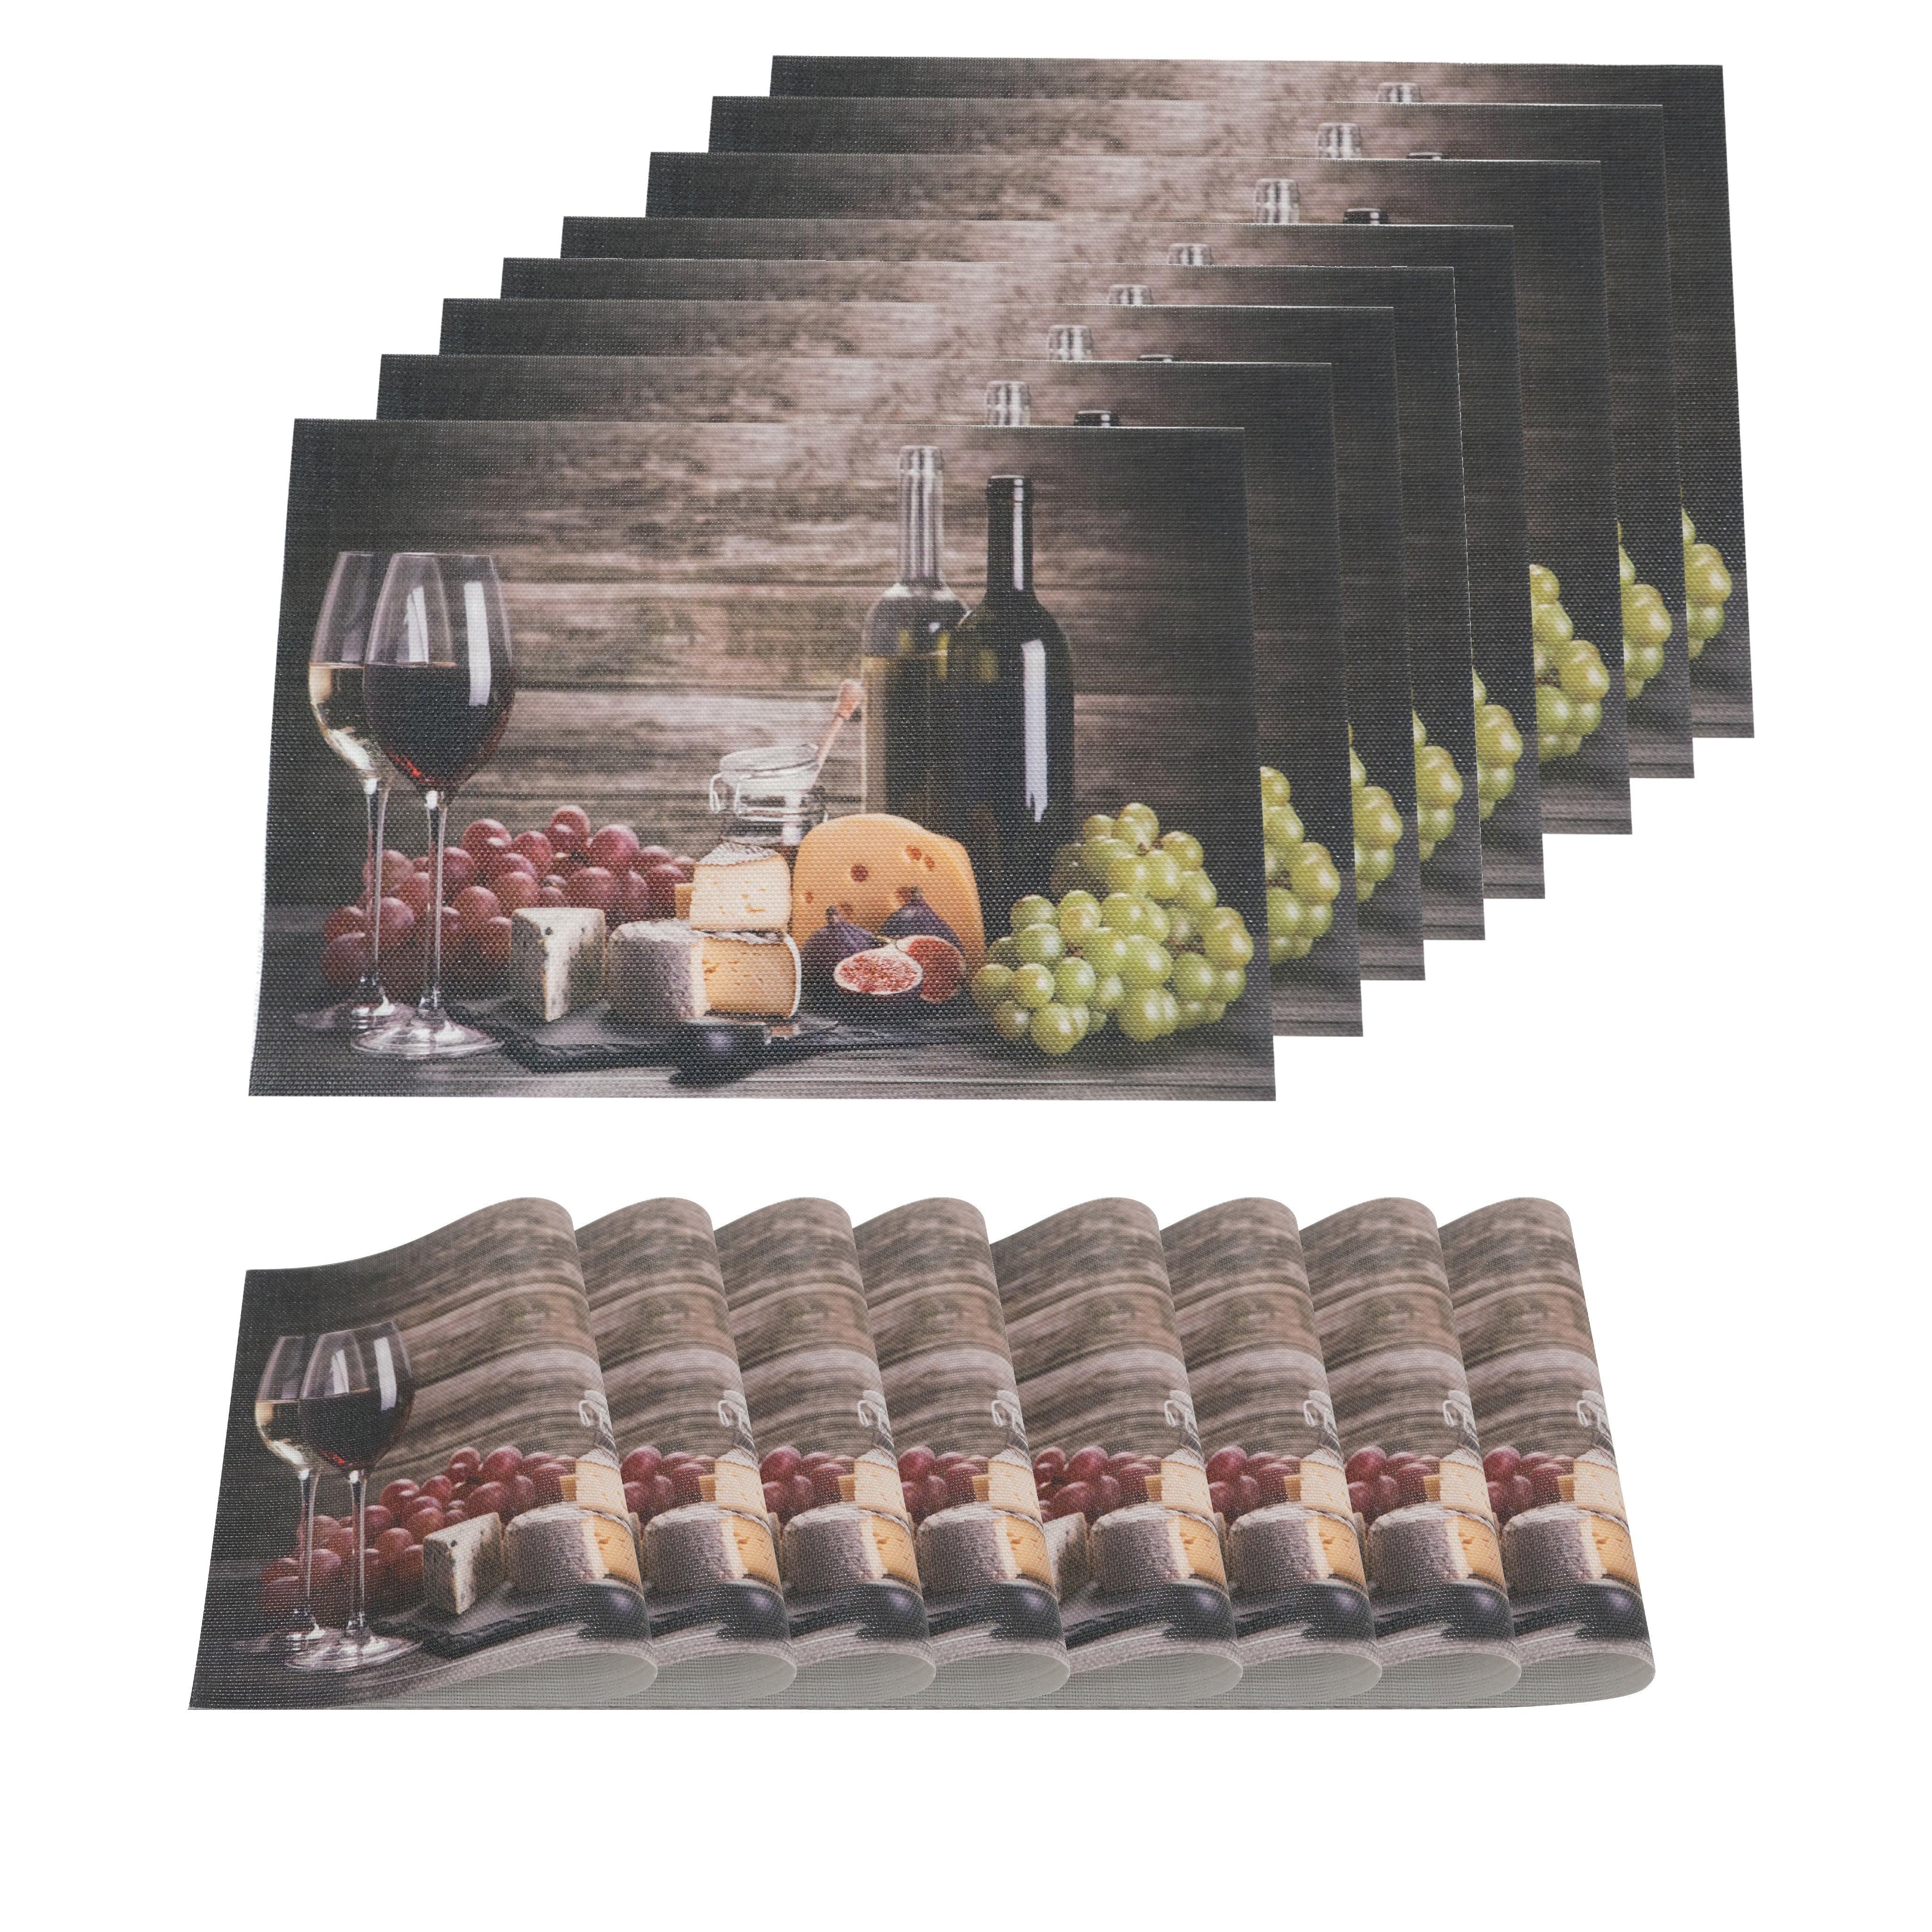 Dainty Home Grapes and Wine Woven Textilene Crossweave With a Reversible Grapes and Wine Pattern 13" x 19" Rectangular Placemats